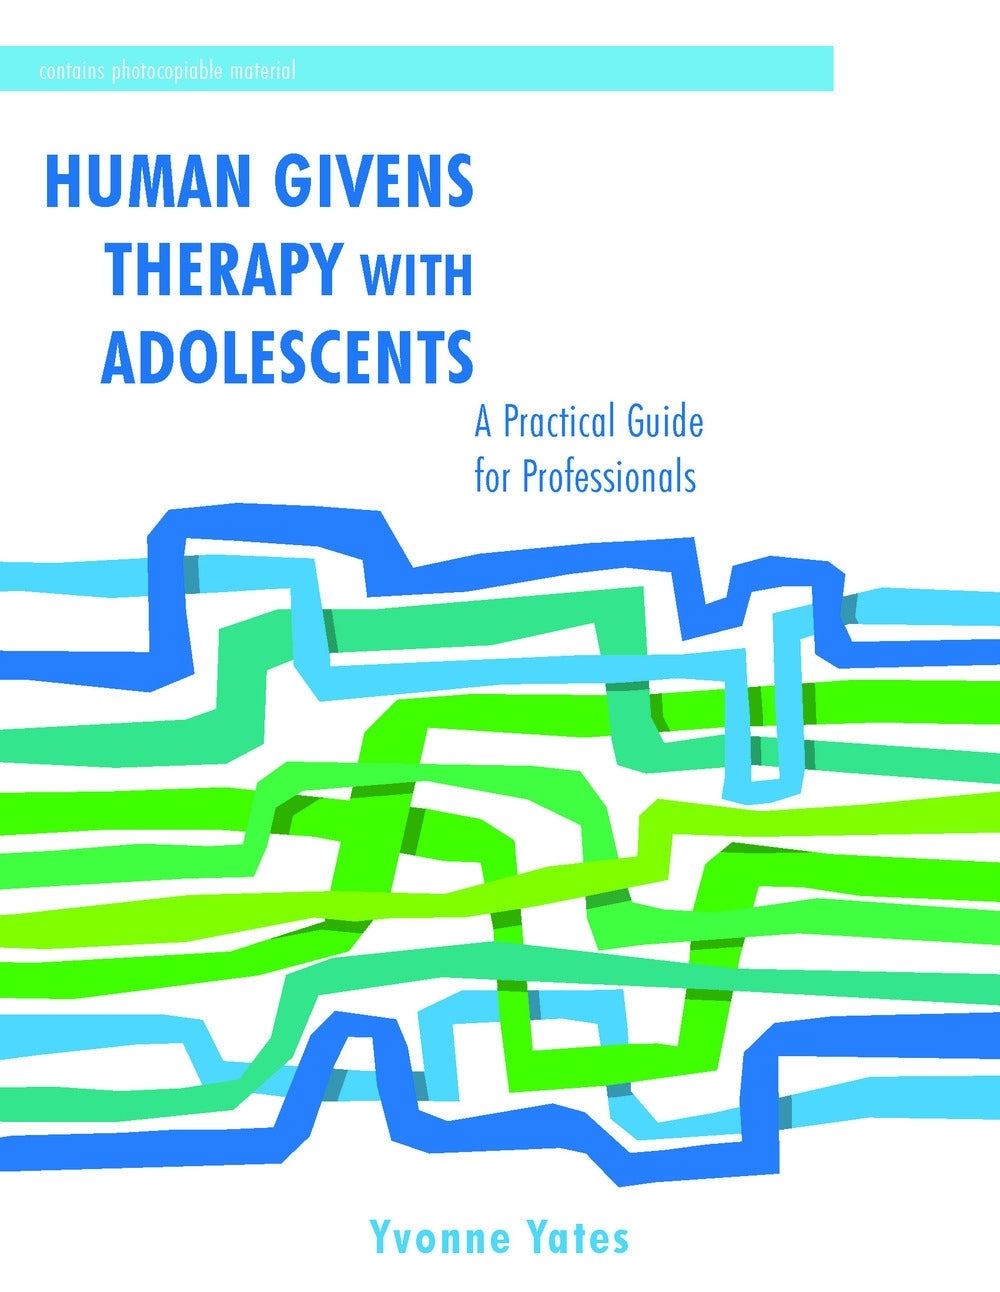 Human Givens Therapy with Adolescents by Yvonne Yates